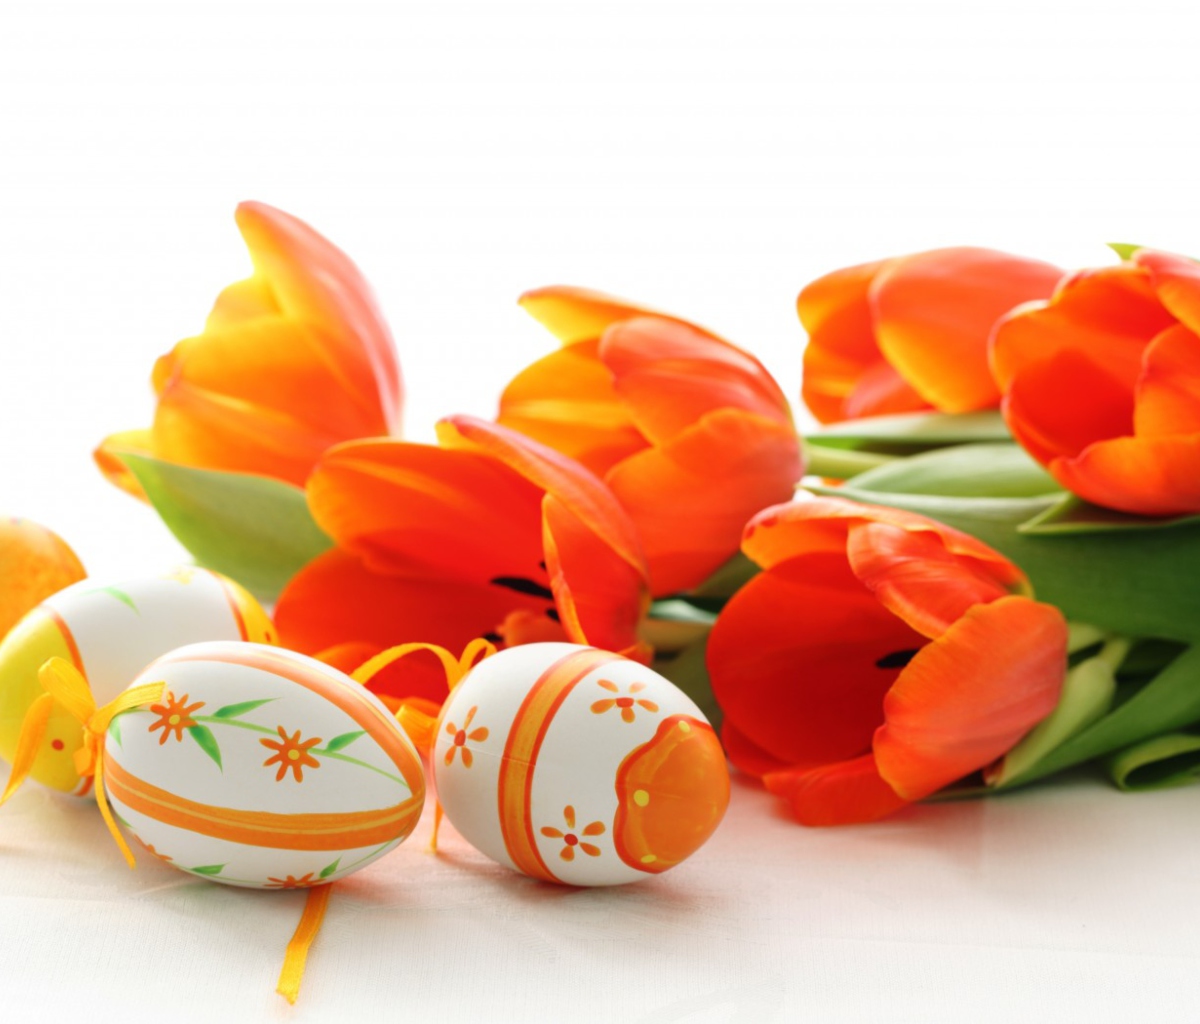 Eggs And Tulips wallpaper 1200x1024